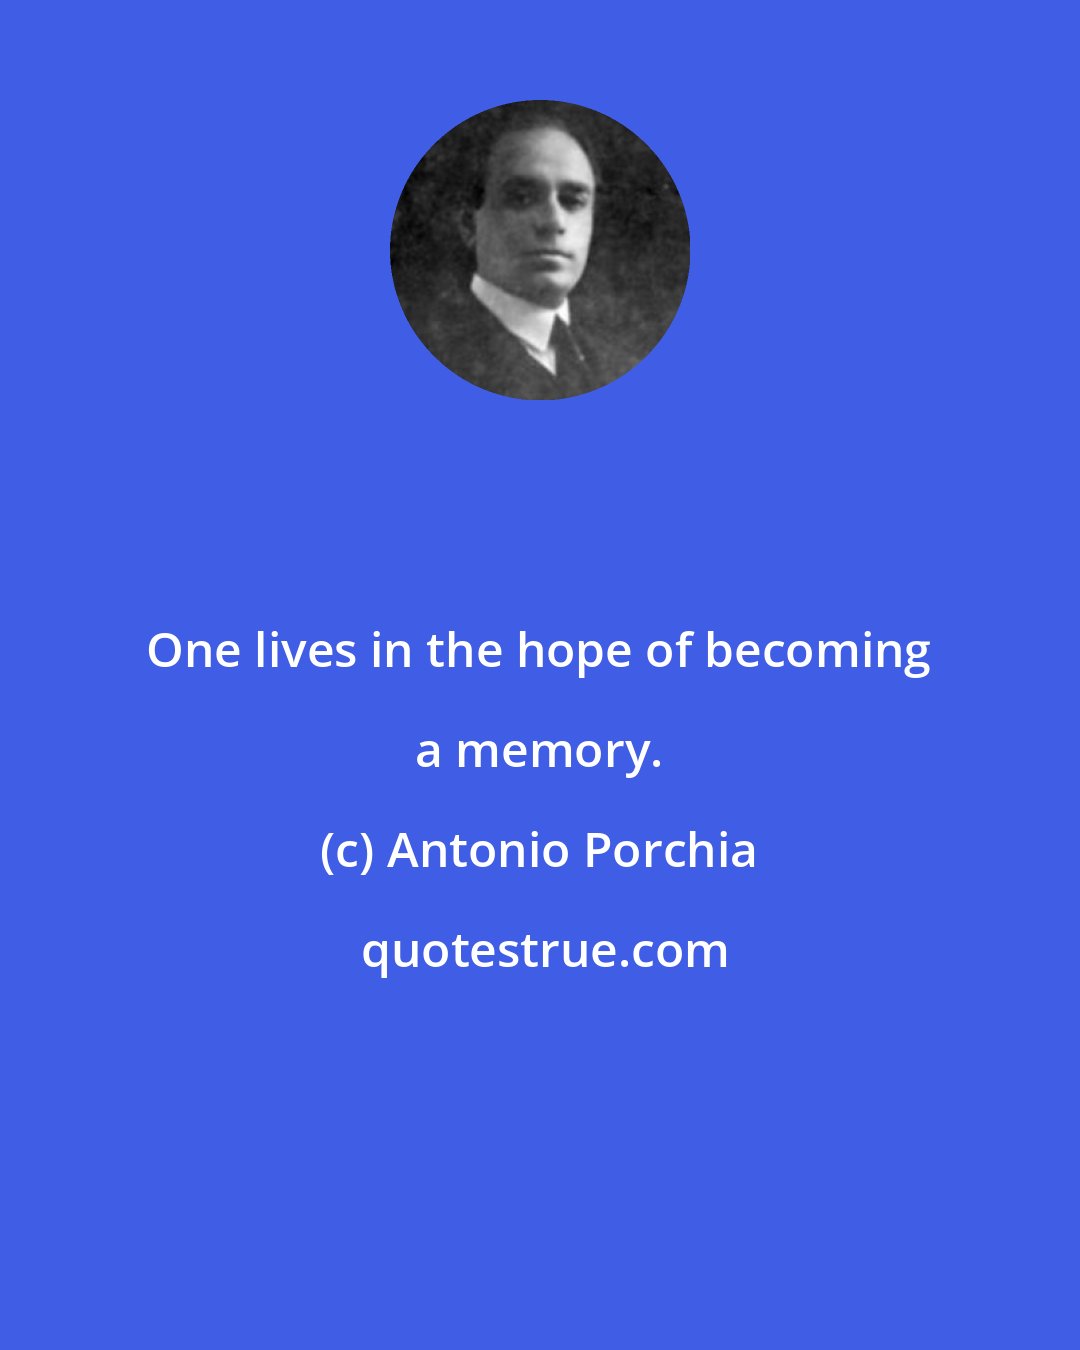 Antonio Porchia: One lives in the hope of becoming a memory.